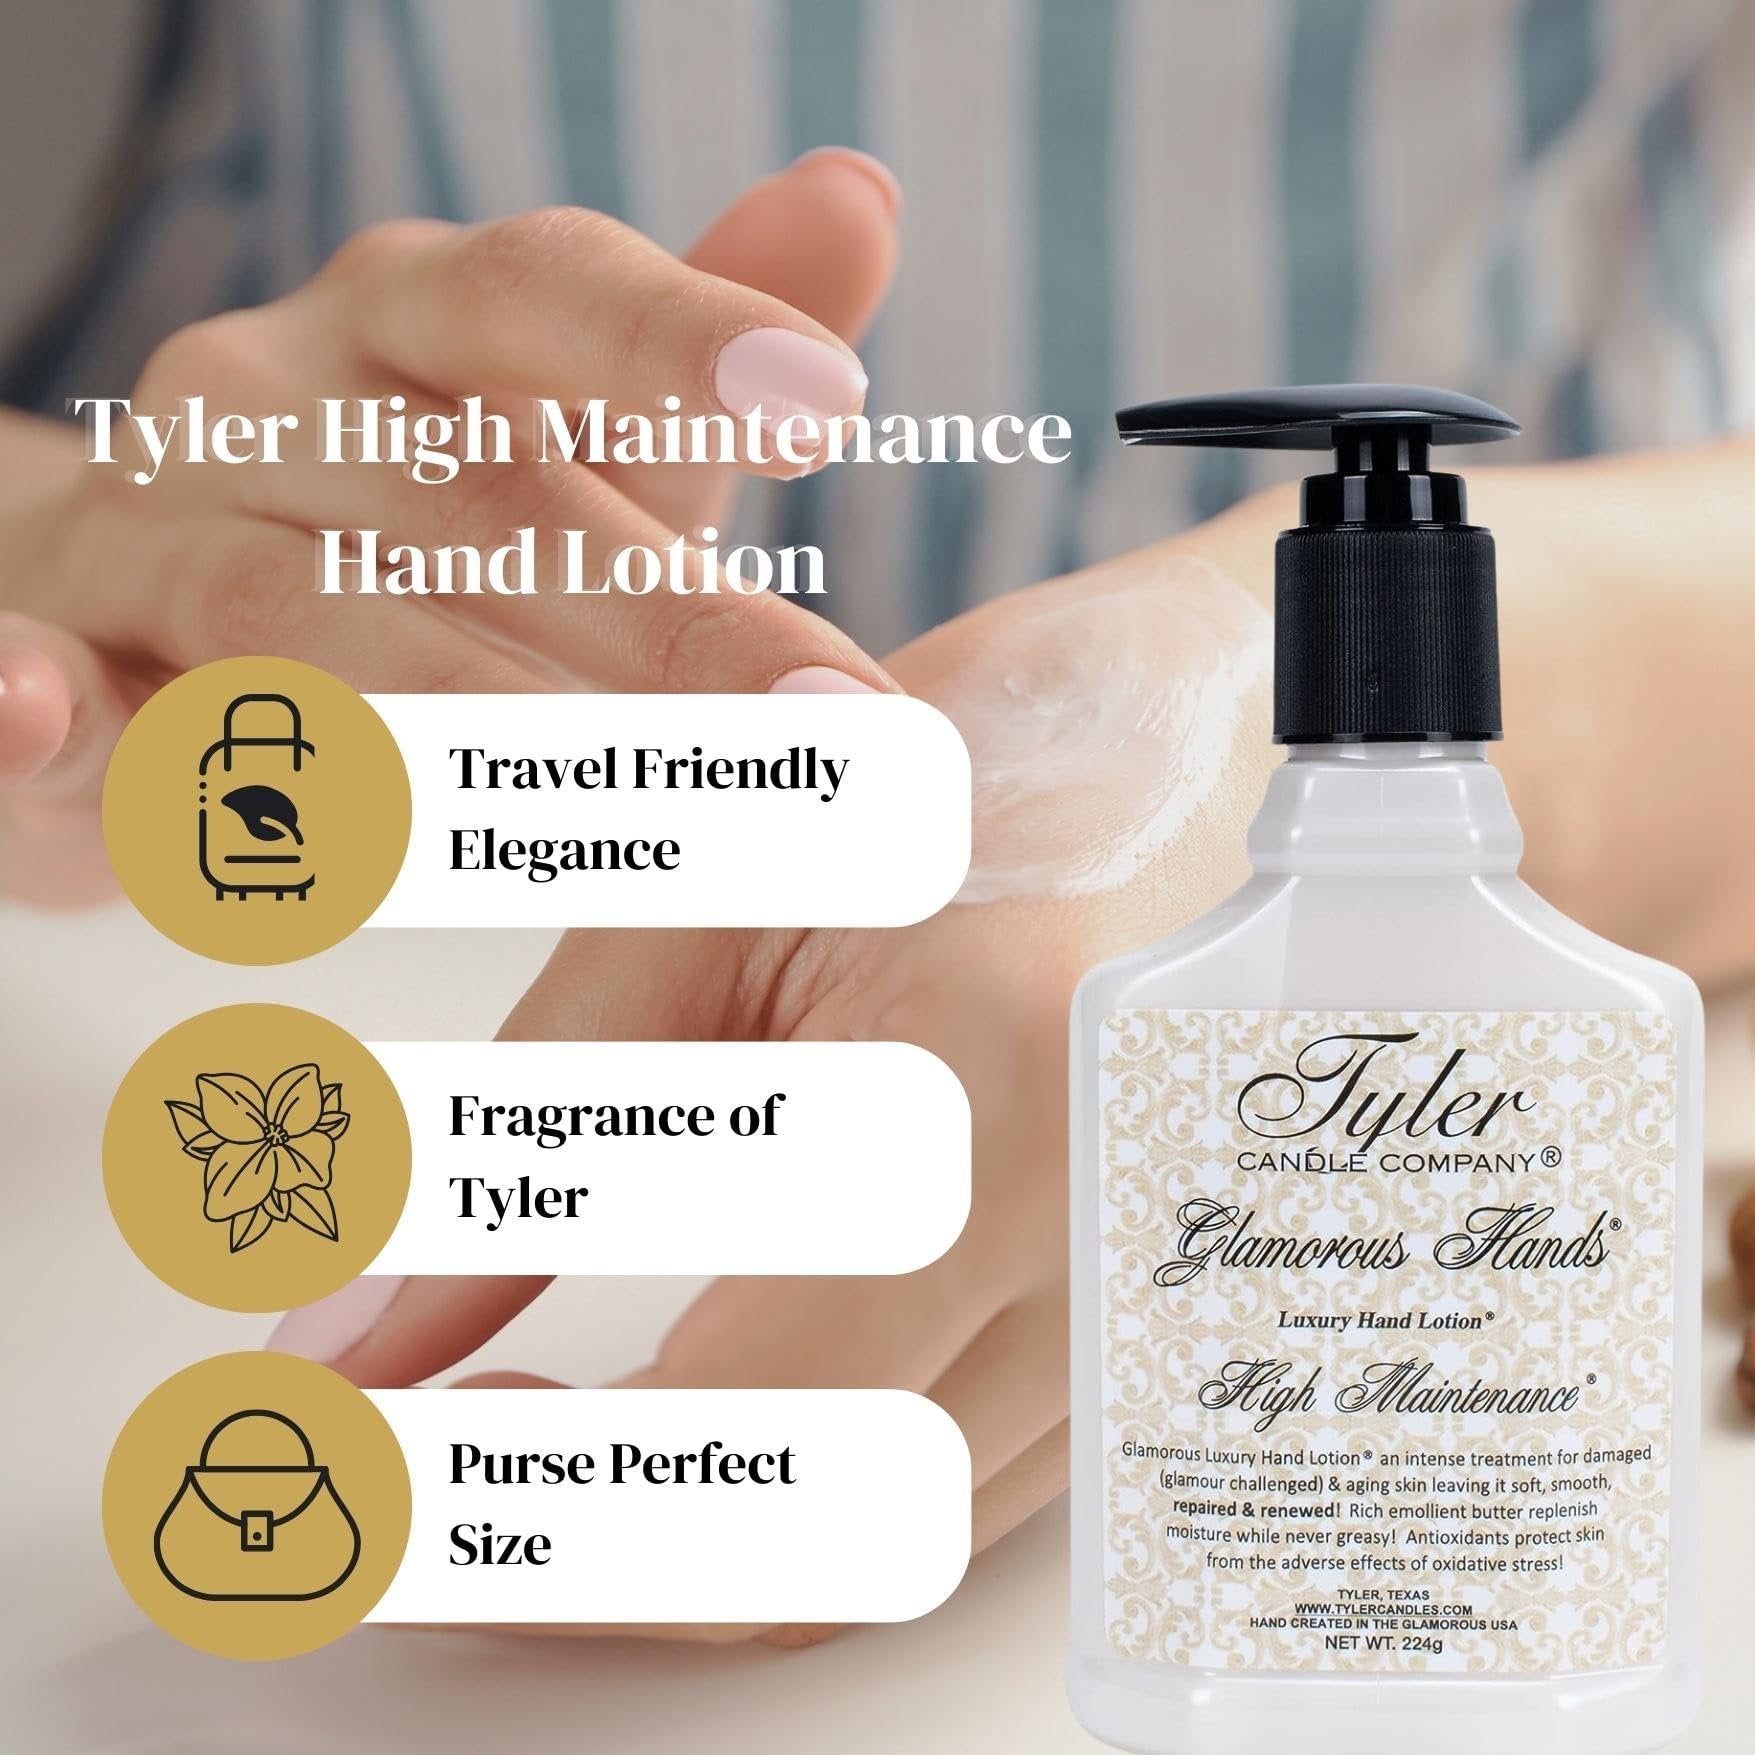 Tyler High Maintenance Hand Lotion - Scented and Small Hand Cream For Dry Hands - 8 Oz Travel Size Luxury Hand Moisturizer and Multi-Purpose Key Chain